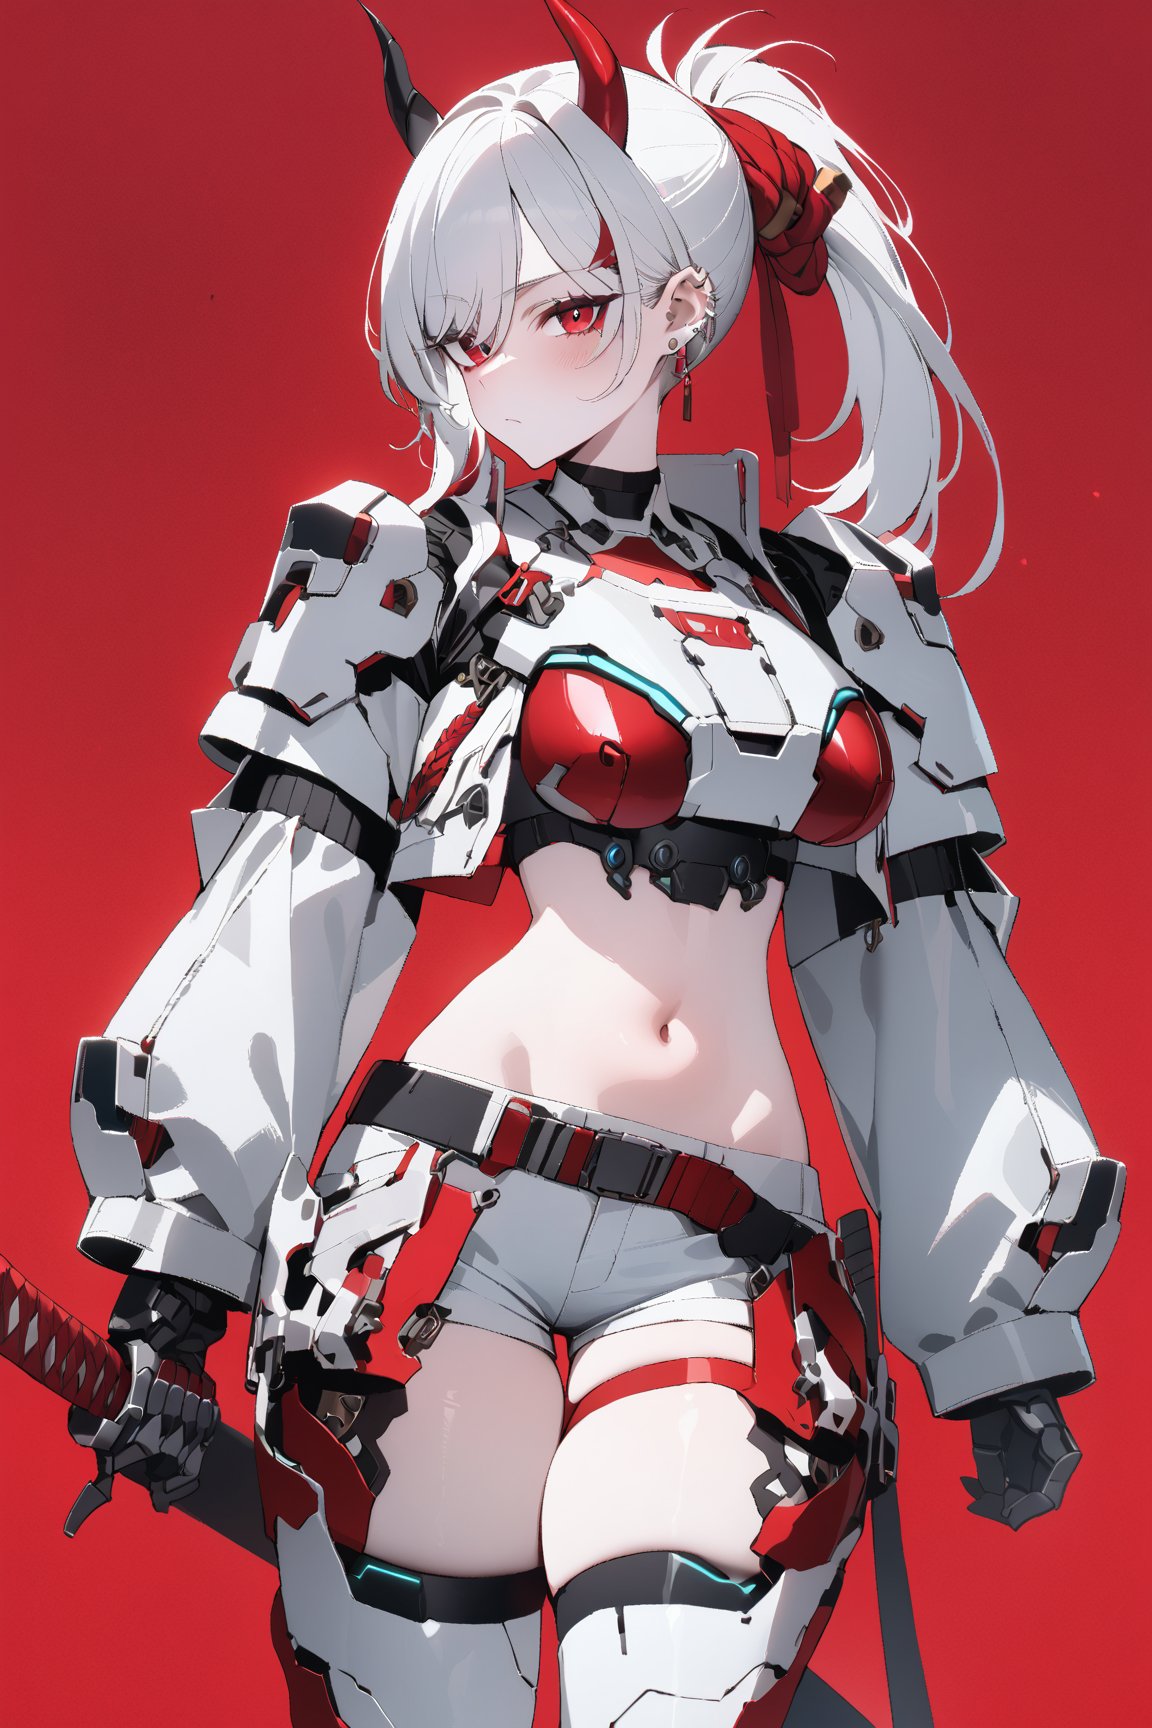 SCORE_9, SCORE_8_UP, SCORE_7_UP, SCORE_6_UP,

MASTERPIECE, BEST QUALITY, HIGH QUALITY, 
HIGHRES, ABSURDRES, PERFECT COMPOSITION,
INTRICATE DETAILS, ULTRA-DETAILED,
PERFECT FACE, PERFECT EYES,
NEWEST, 

full_body, red_background, sword, horns, weapon, 1girl, solo, sheath, ponytail, sheathed, red_eyes, katana, jewelry, earrings, white_hair, scabbard, holding_weapon, long_sleeves, simple_background, long_hair, holding_sword, standing, white_coat, ear_piercing, side_view, closed_mouth, holding, cowboy_shot, piercing, white_shorts, crop_jacket, pale_skin, belt, devil_horns, sleeves_past_wrists, mechanical_hand, large_boobs, armor, futuristic_armor, breast_plate, breast_armor